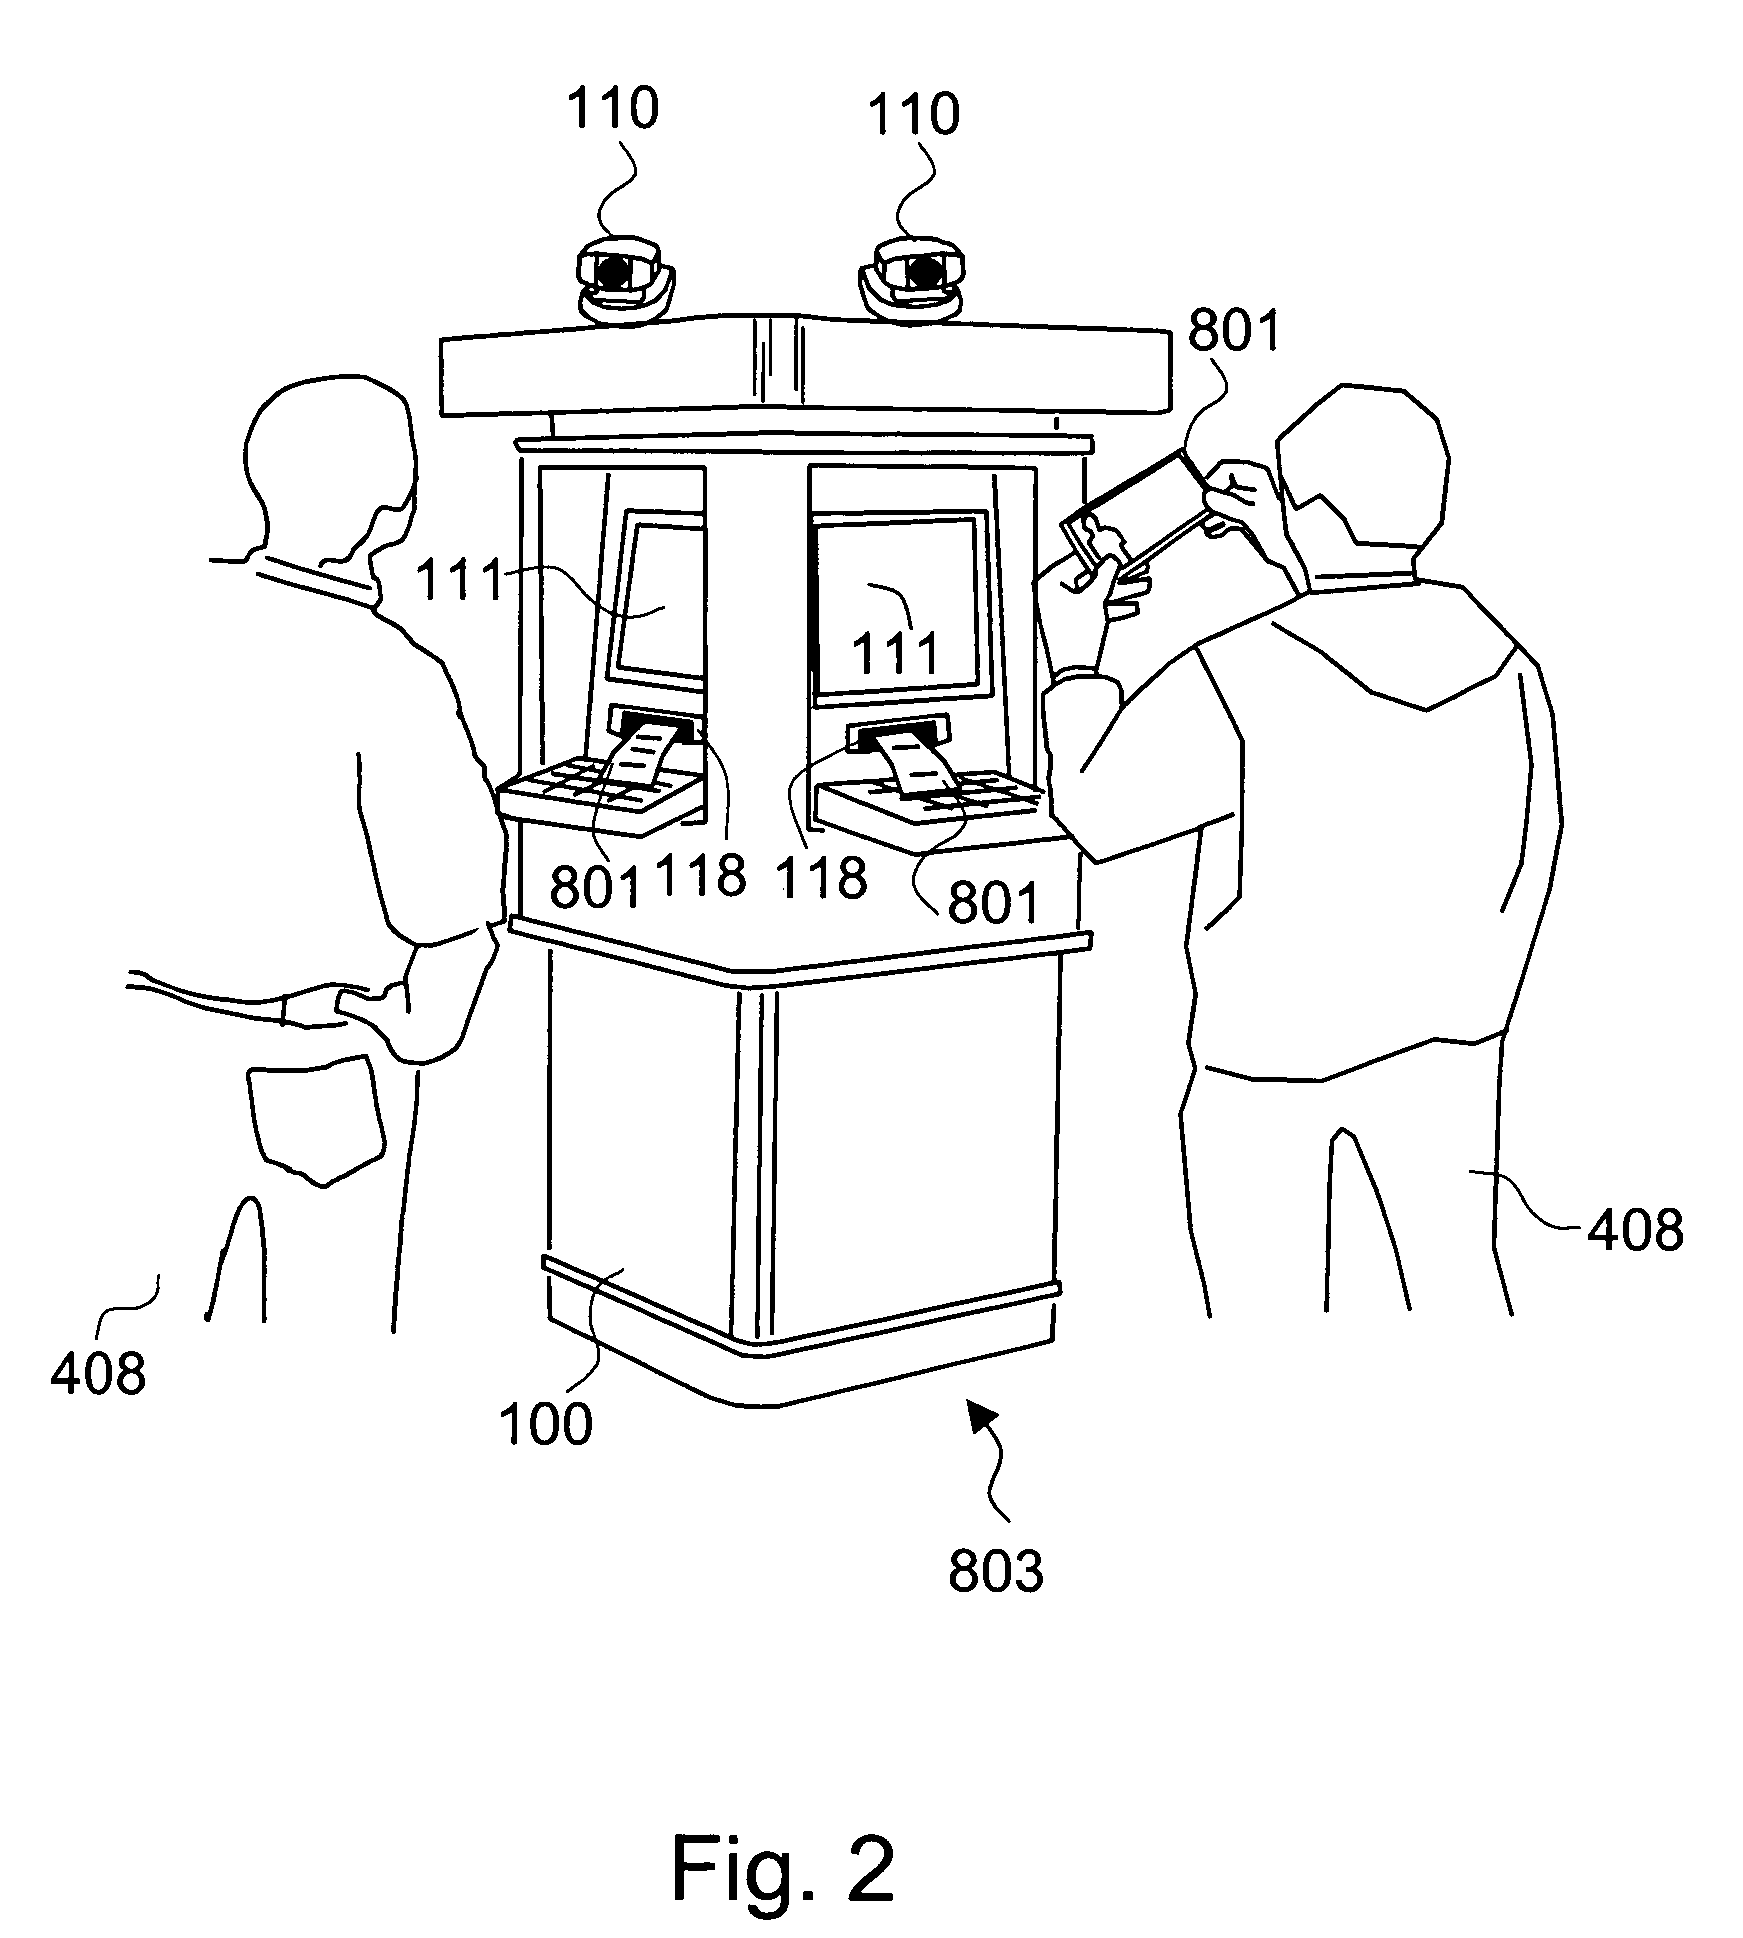 Method and system for printing of automatically captured facial images augmented with promotional content